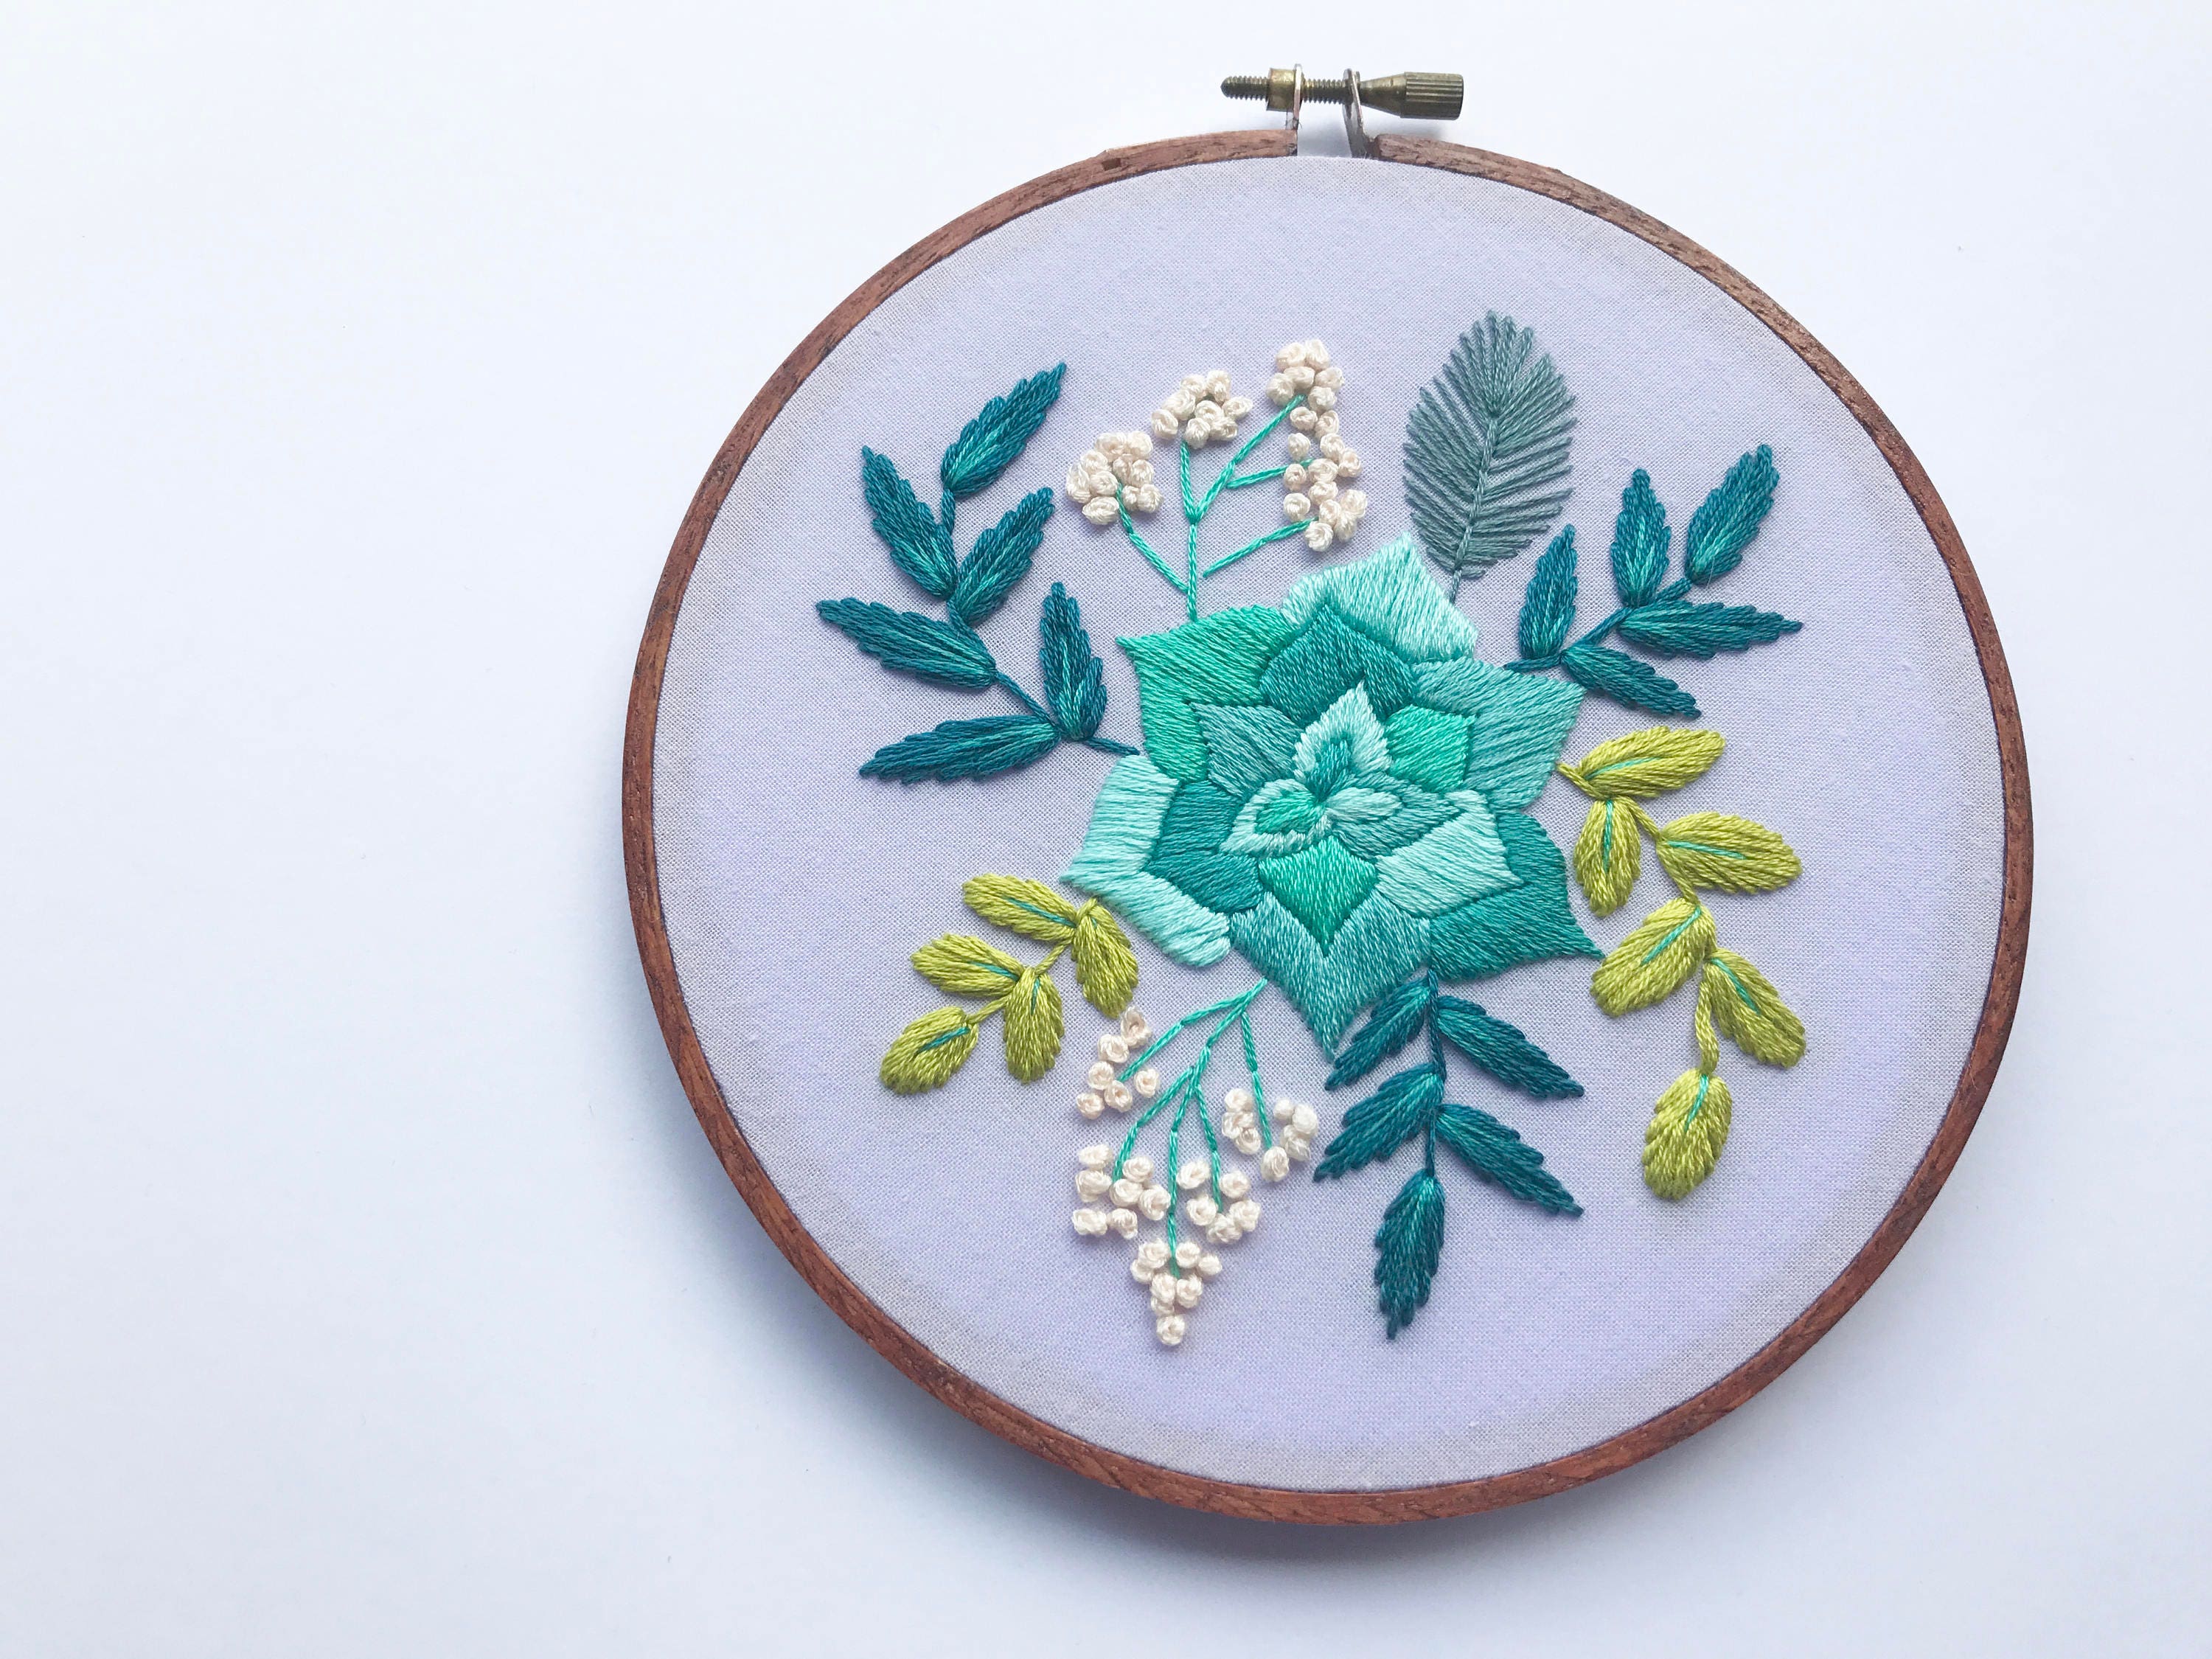 Embroidery Patterns For Sale | Embroidery Shops